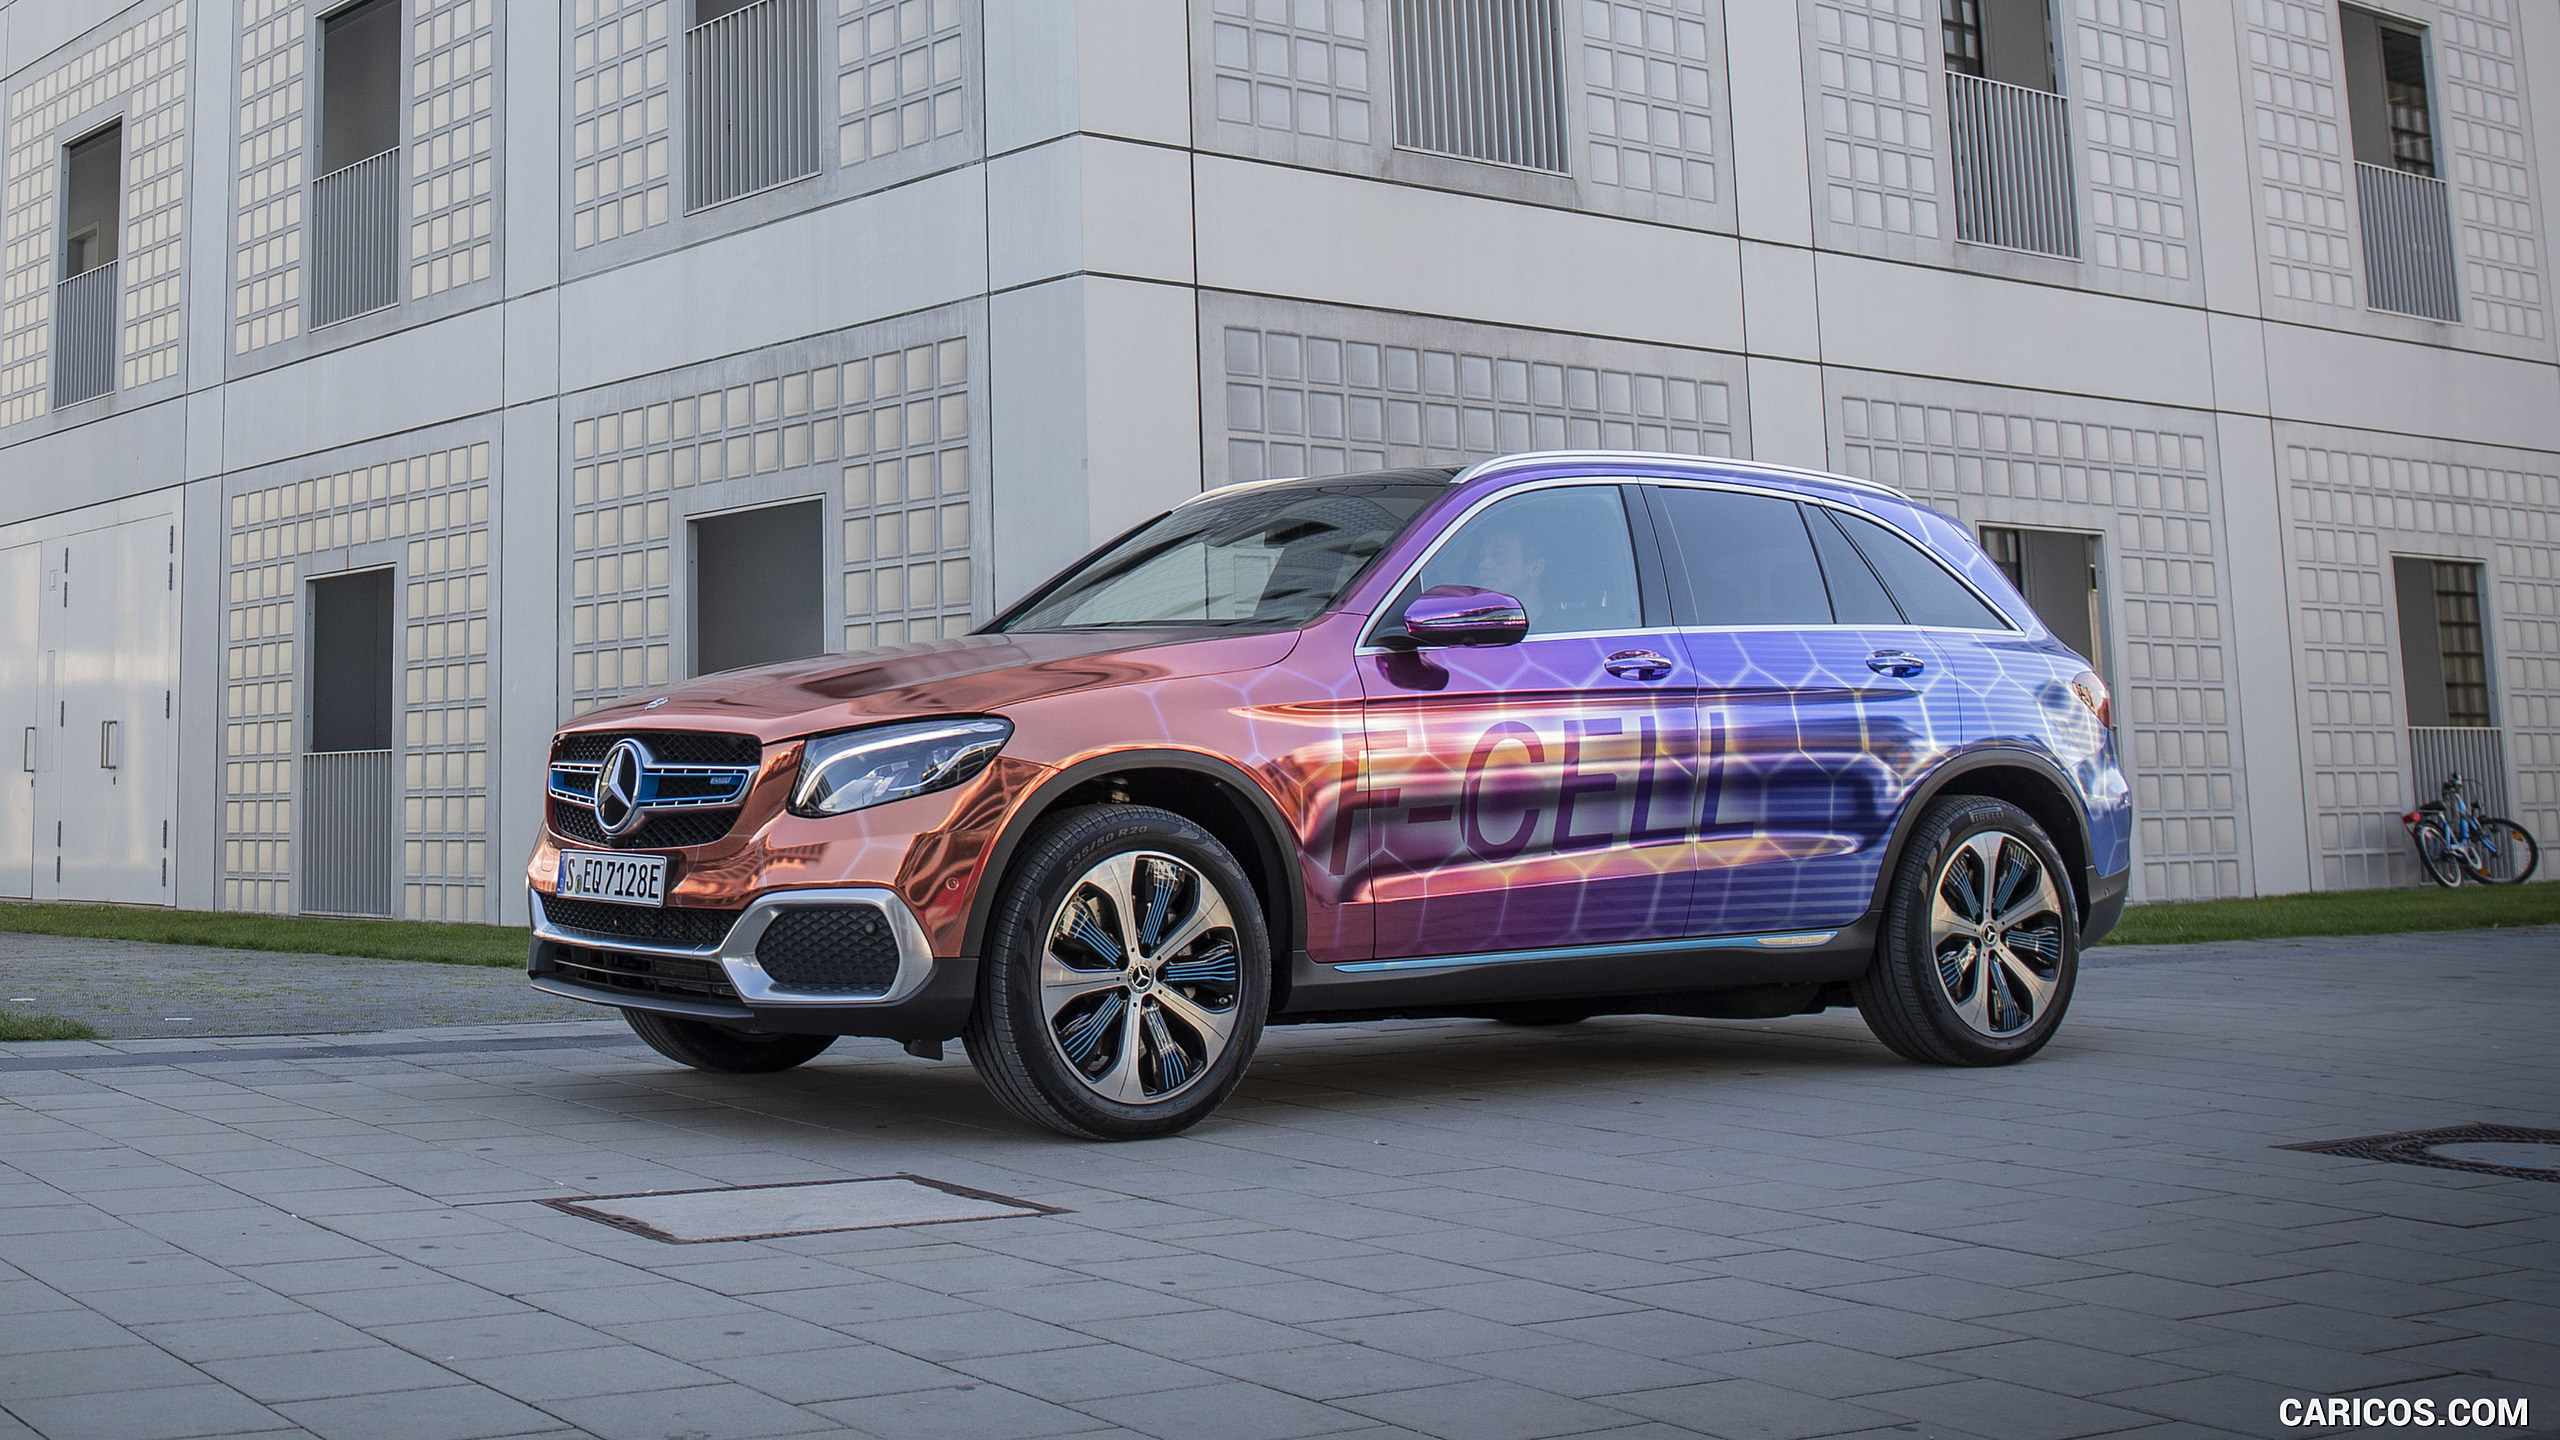 2019 Mercedes-Benz GLC F-CELL - Front Three-Quarter, #61 of 95